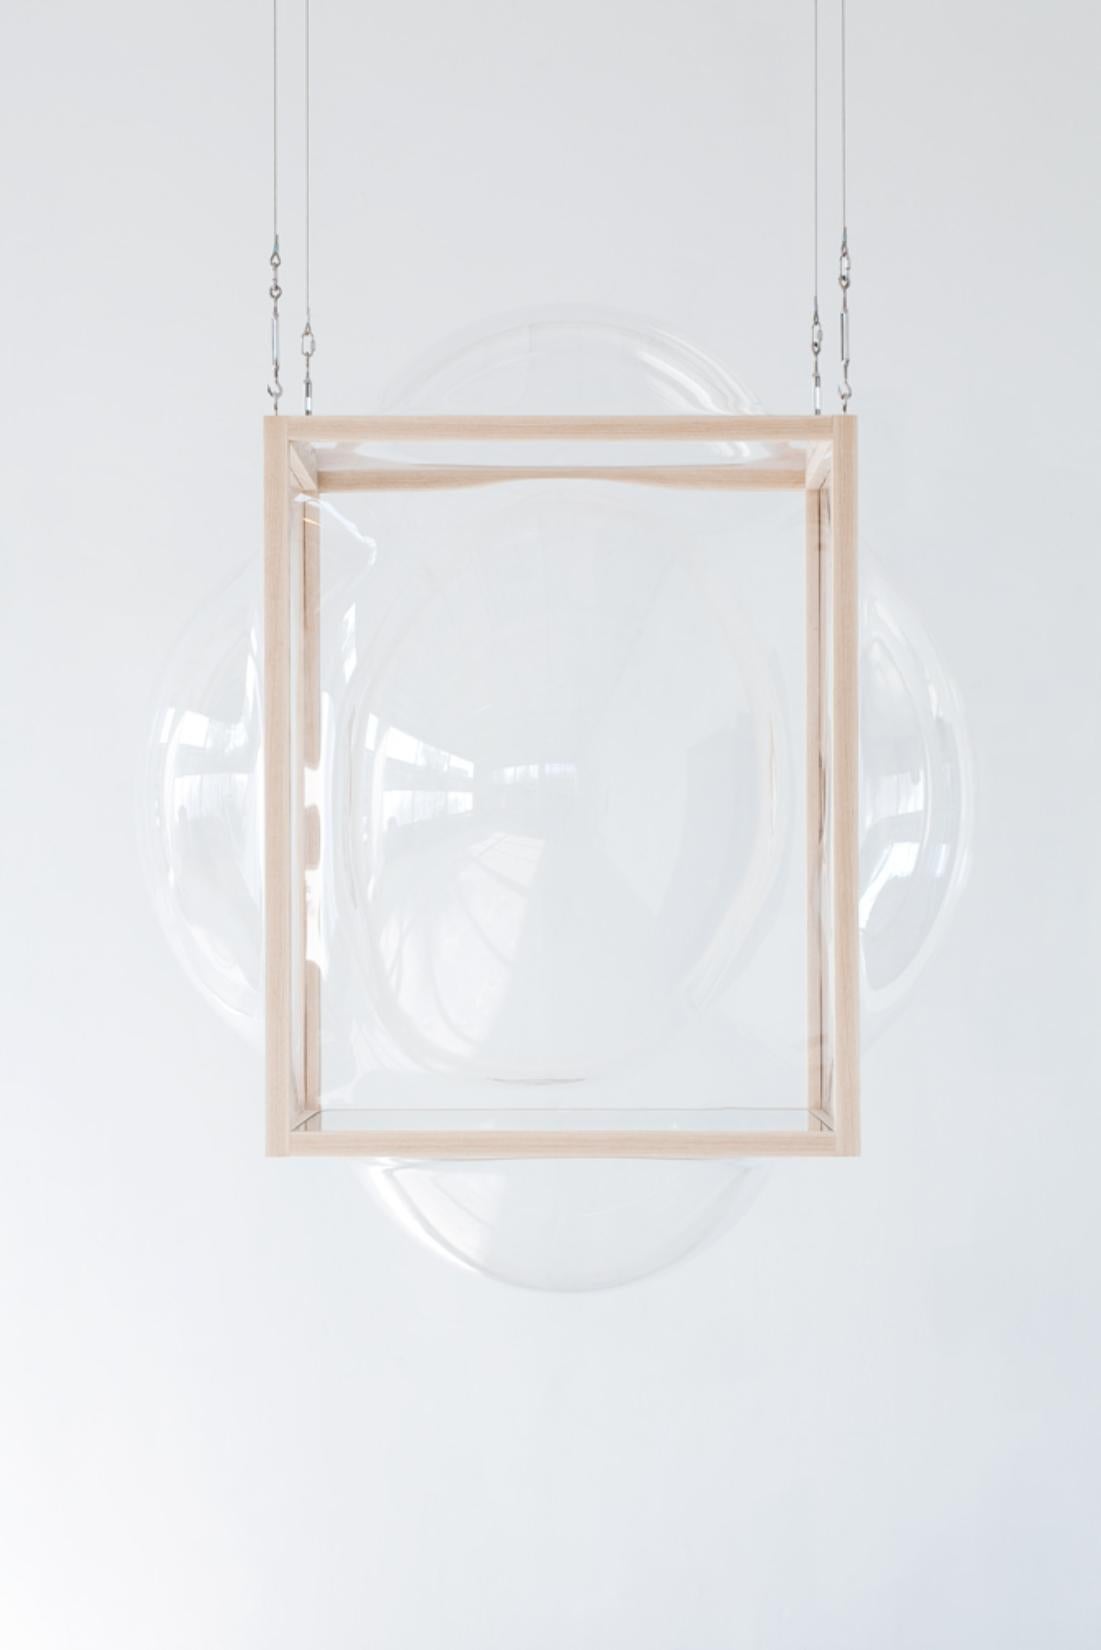 Other Large Hanging Curator Bubble Cabinet by Studio Thier & Van Daalen For Sale